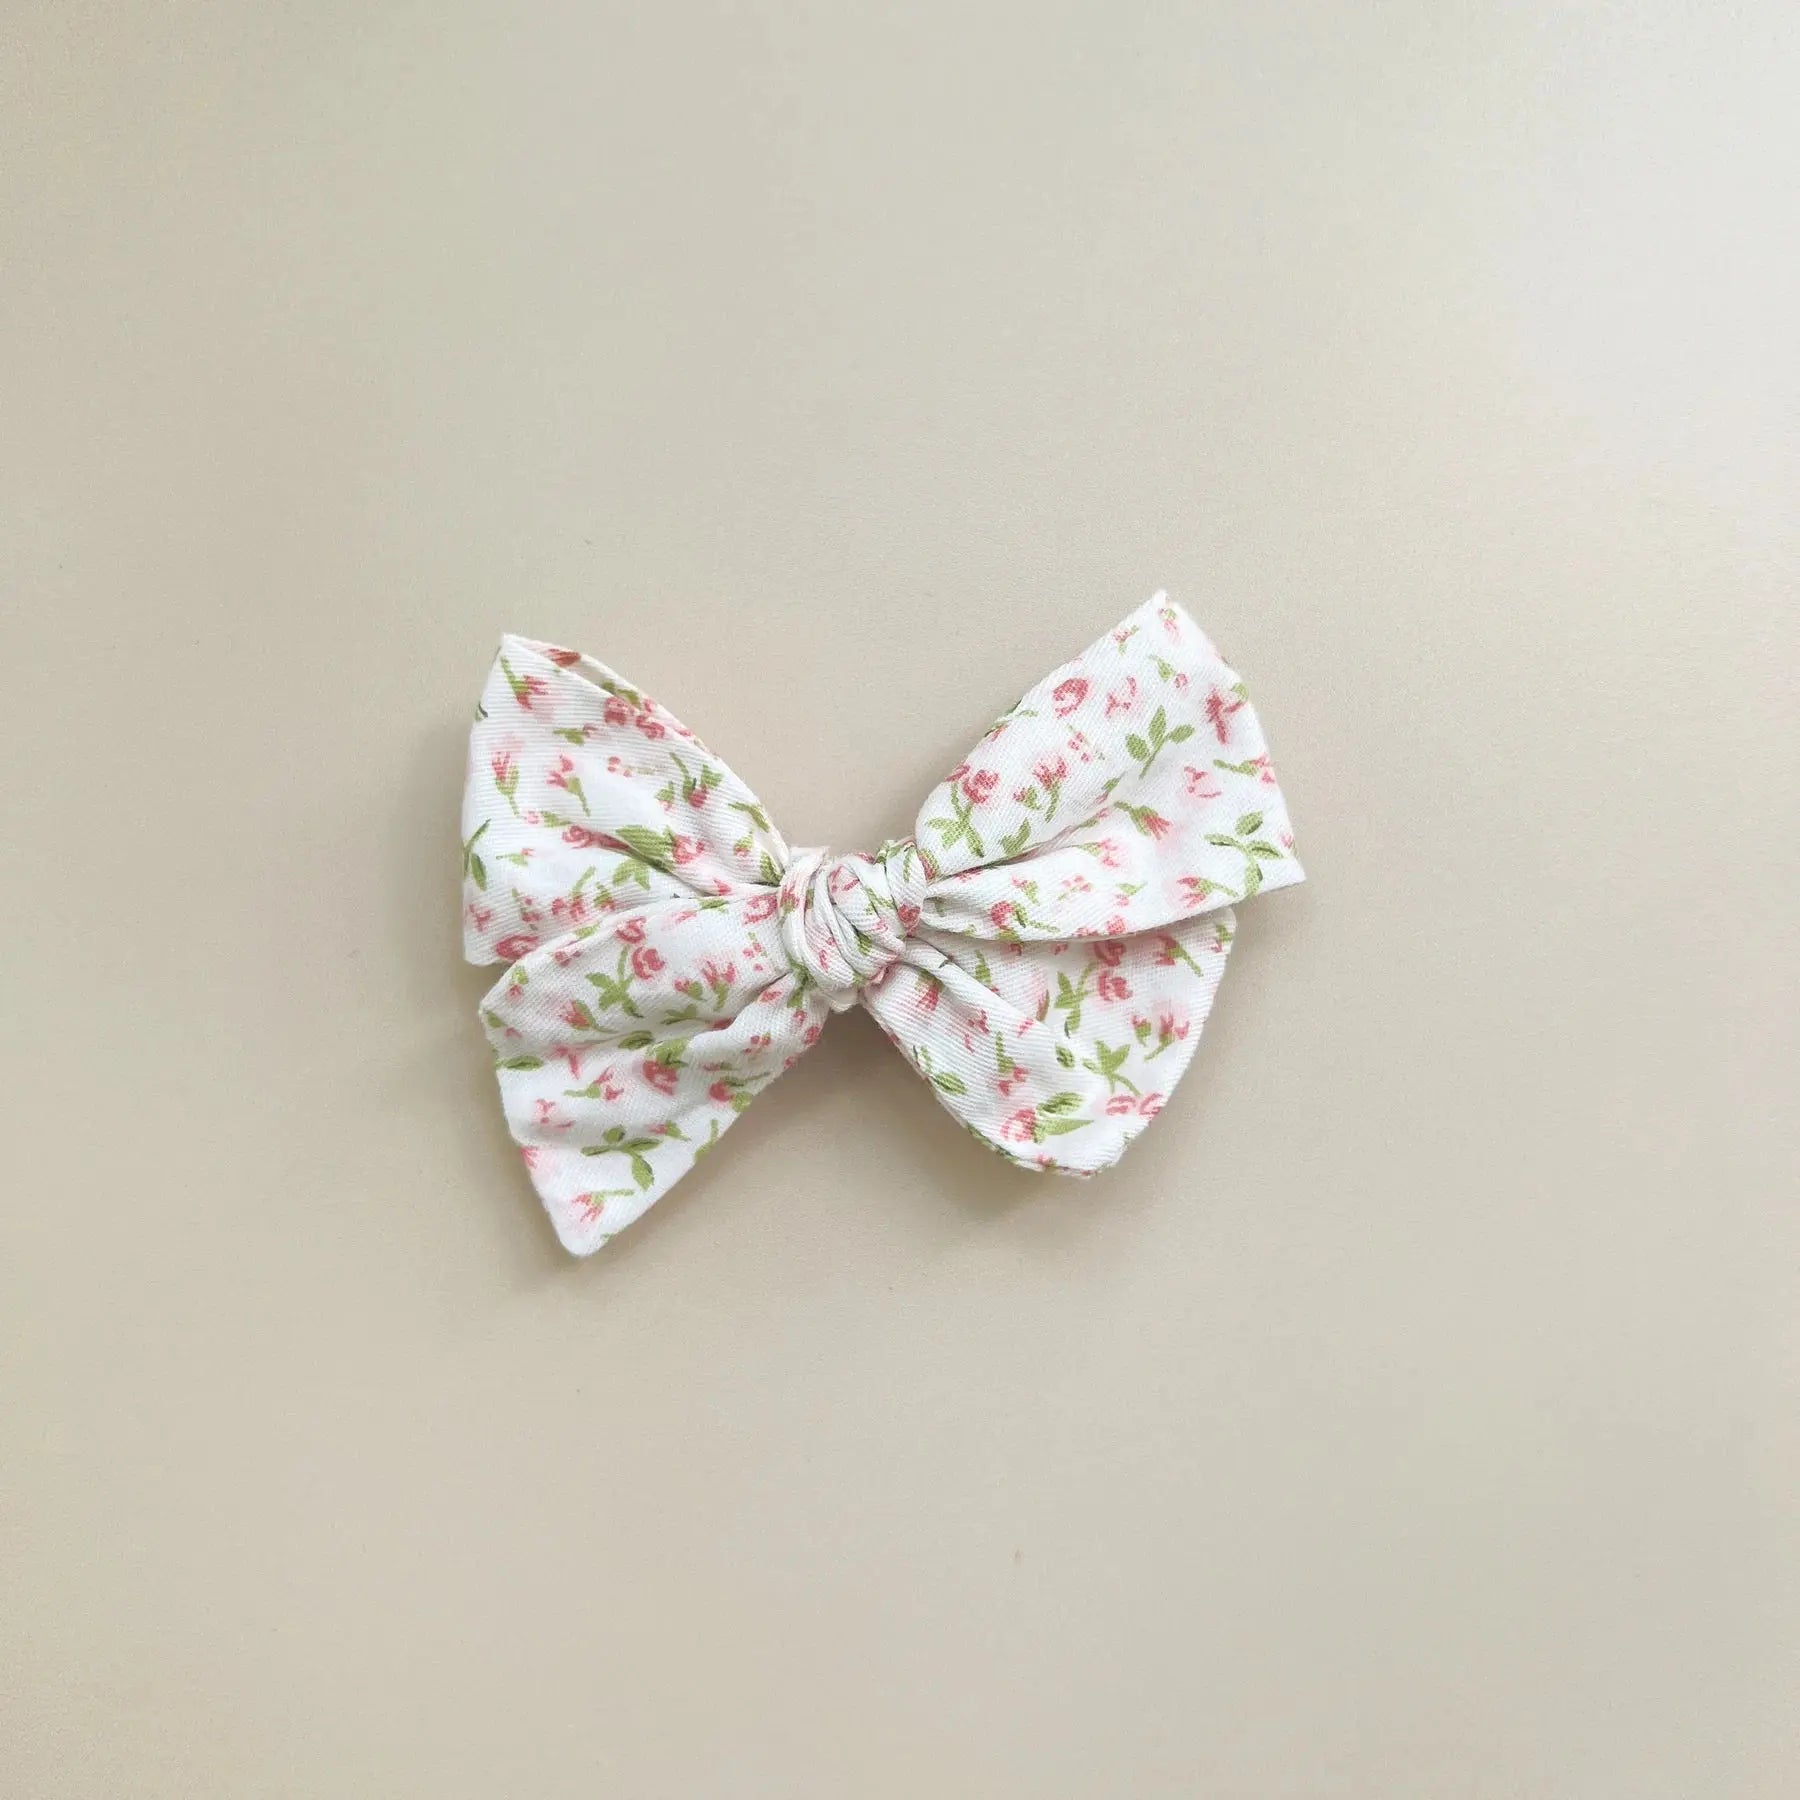 Little and Fern - Pinwheel Bow - Pink Dainty Floral - Birds & Bees baby boutique